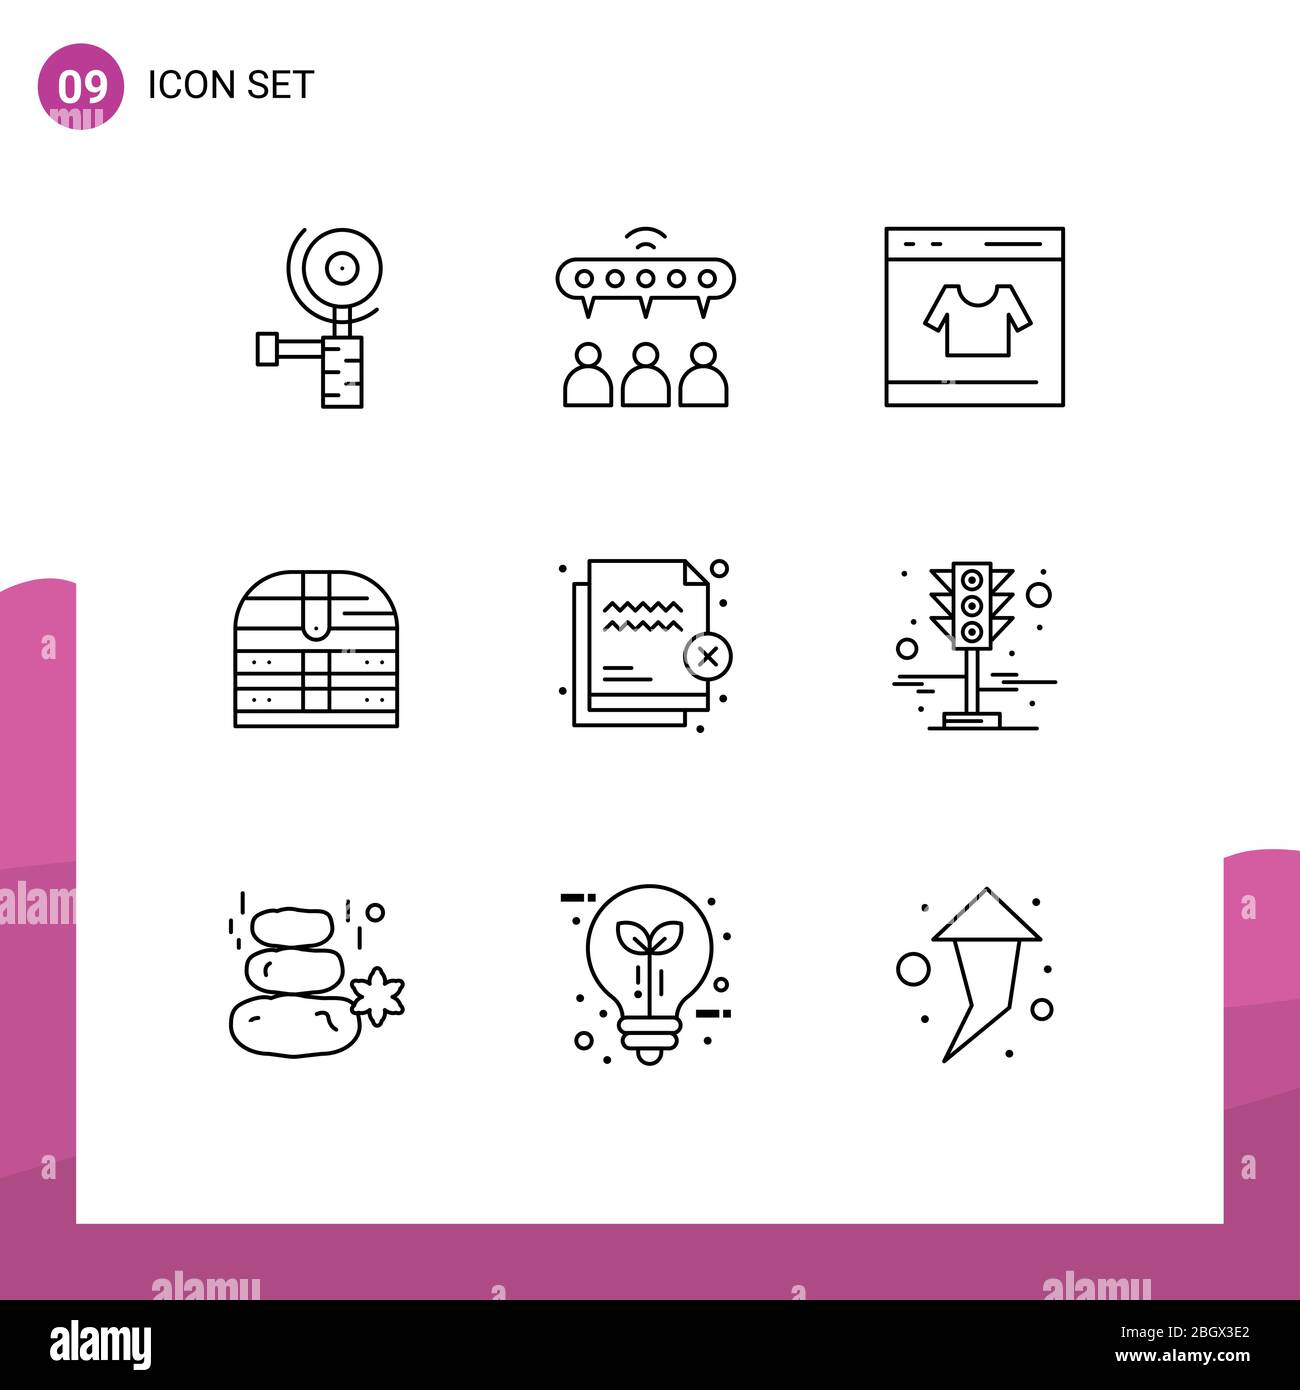 Outline Pack of 9 Universal Symbols of file, security, credit, ireland, box Editable Vector Design Elements Stock Vector